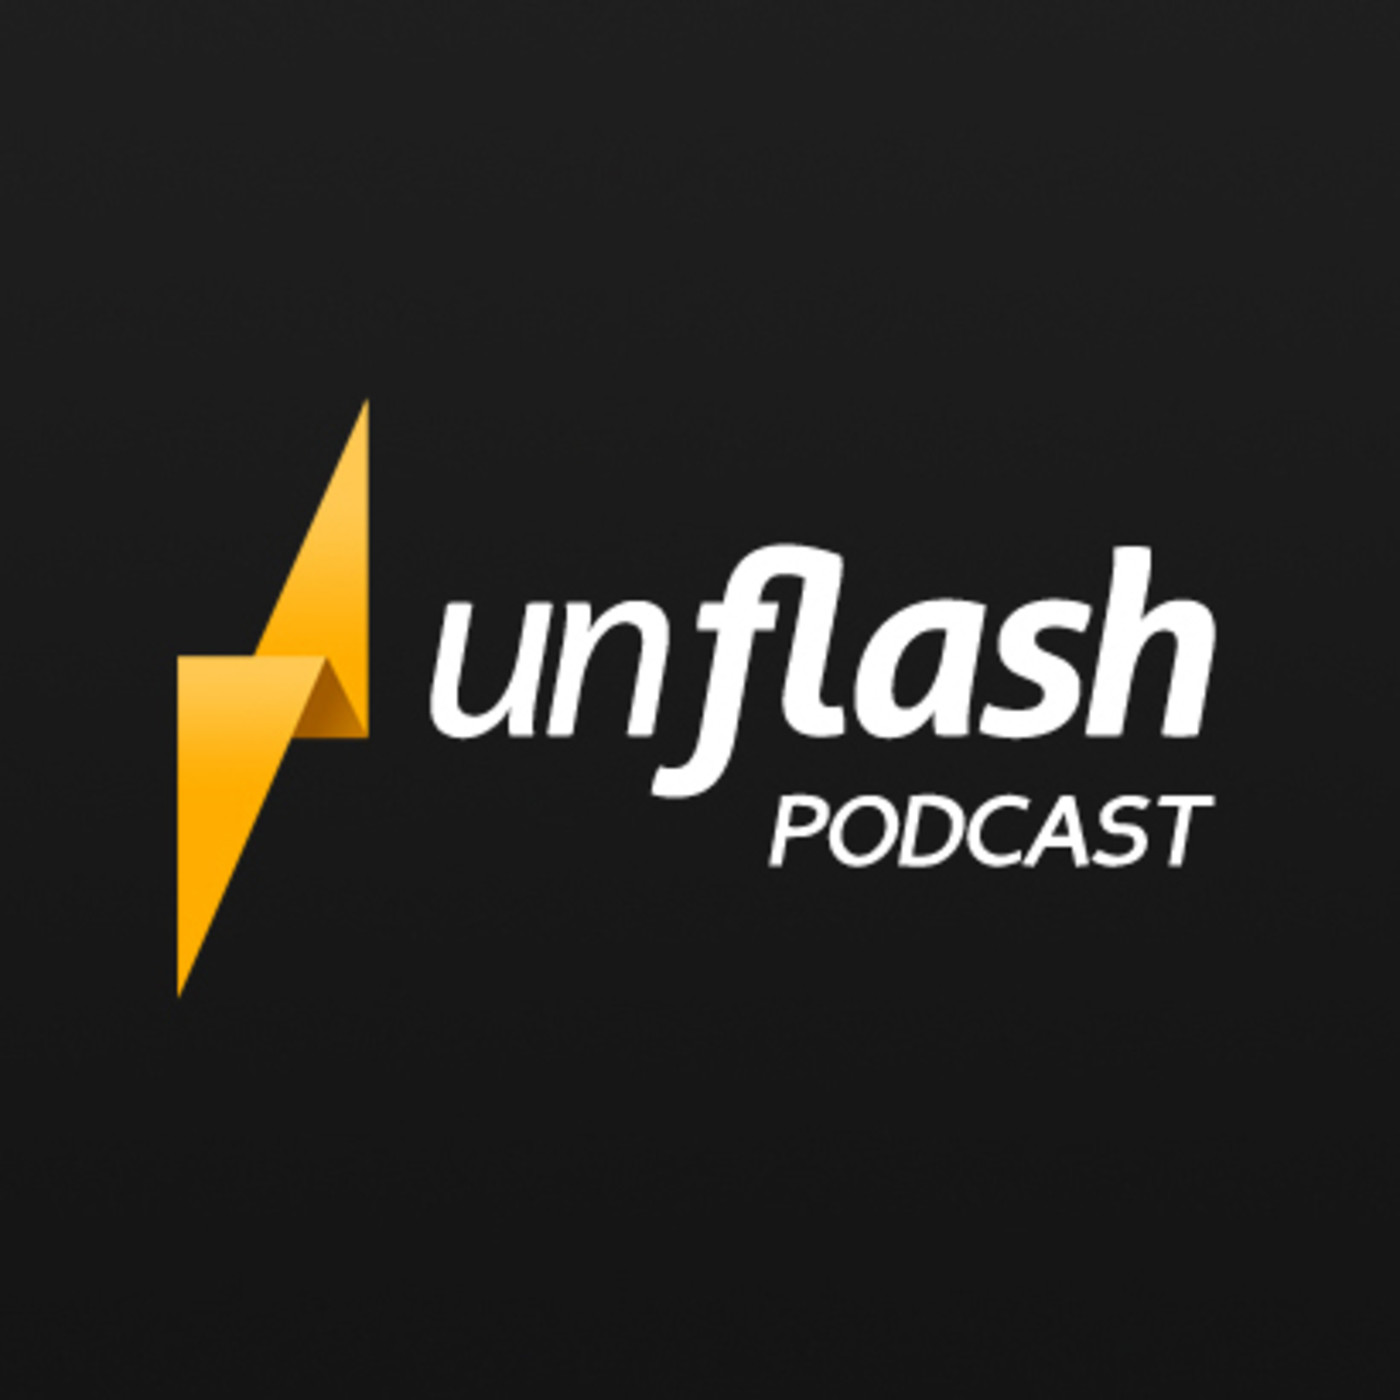 Unflash Podcast